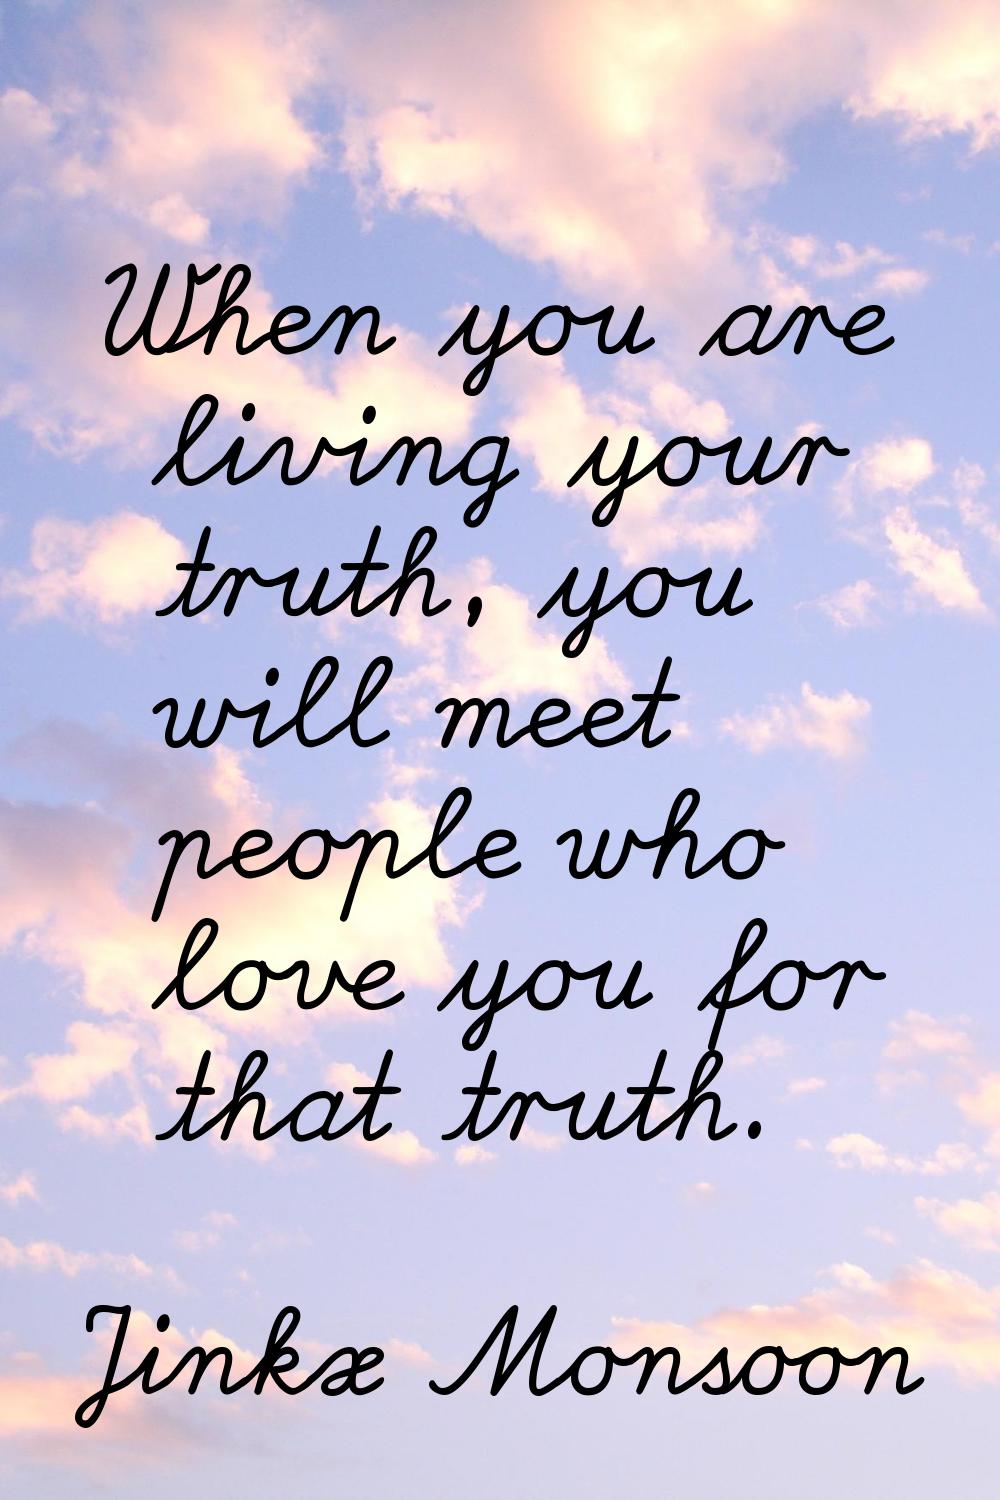 When you are living your truth, you will meet people who love you for that truth.